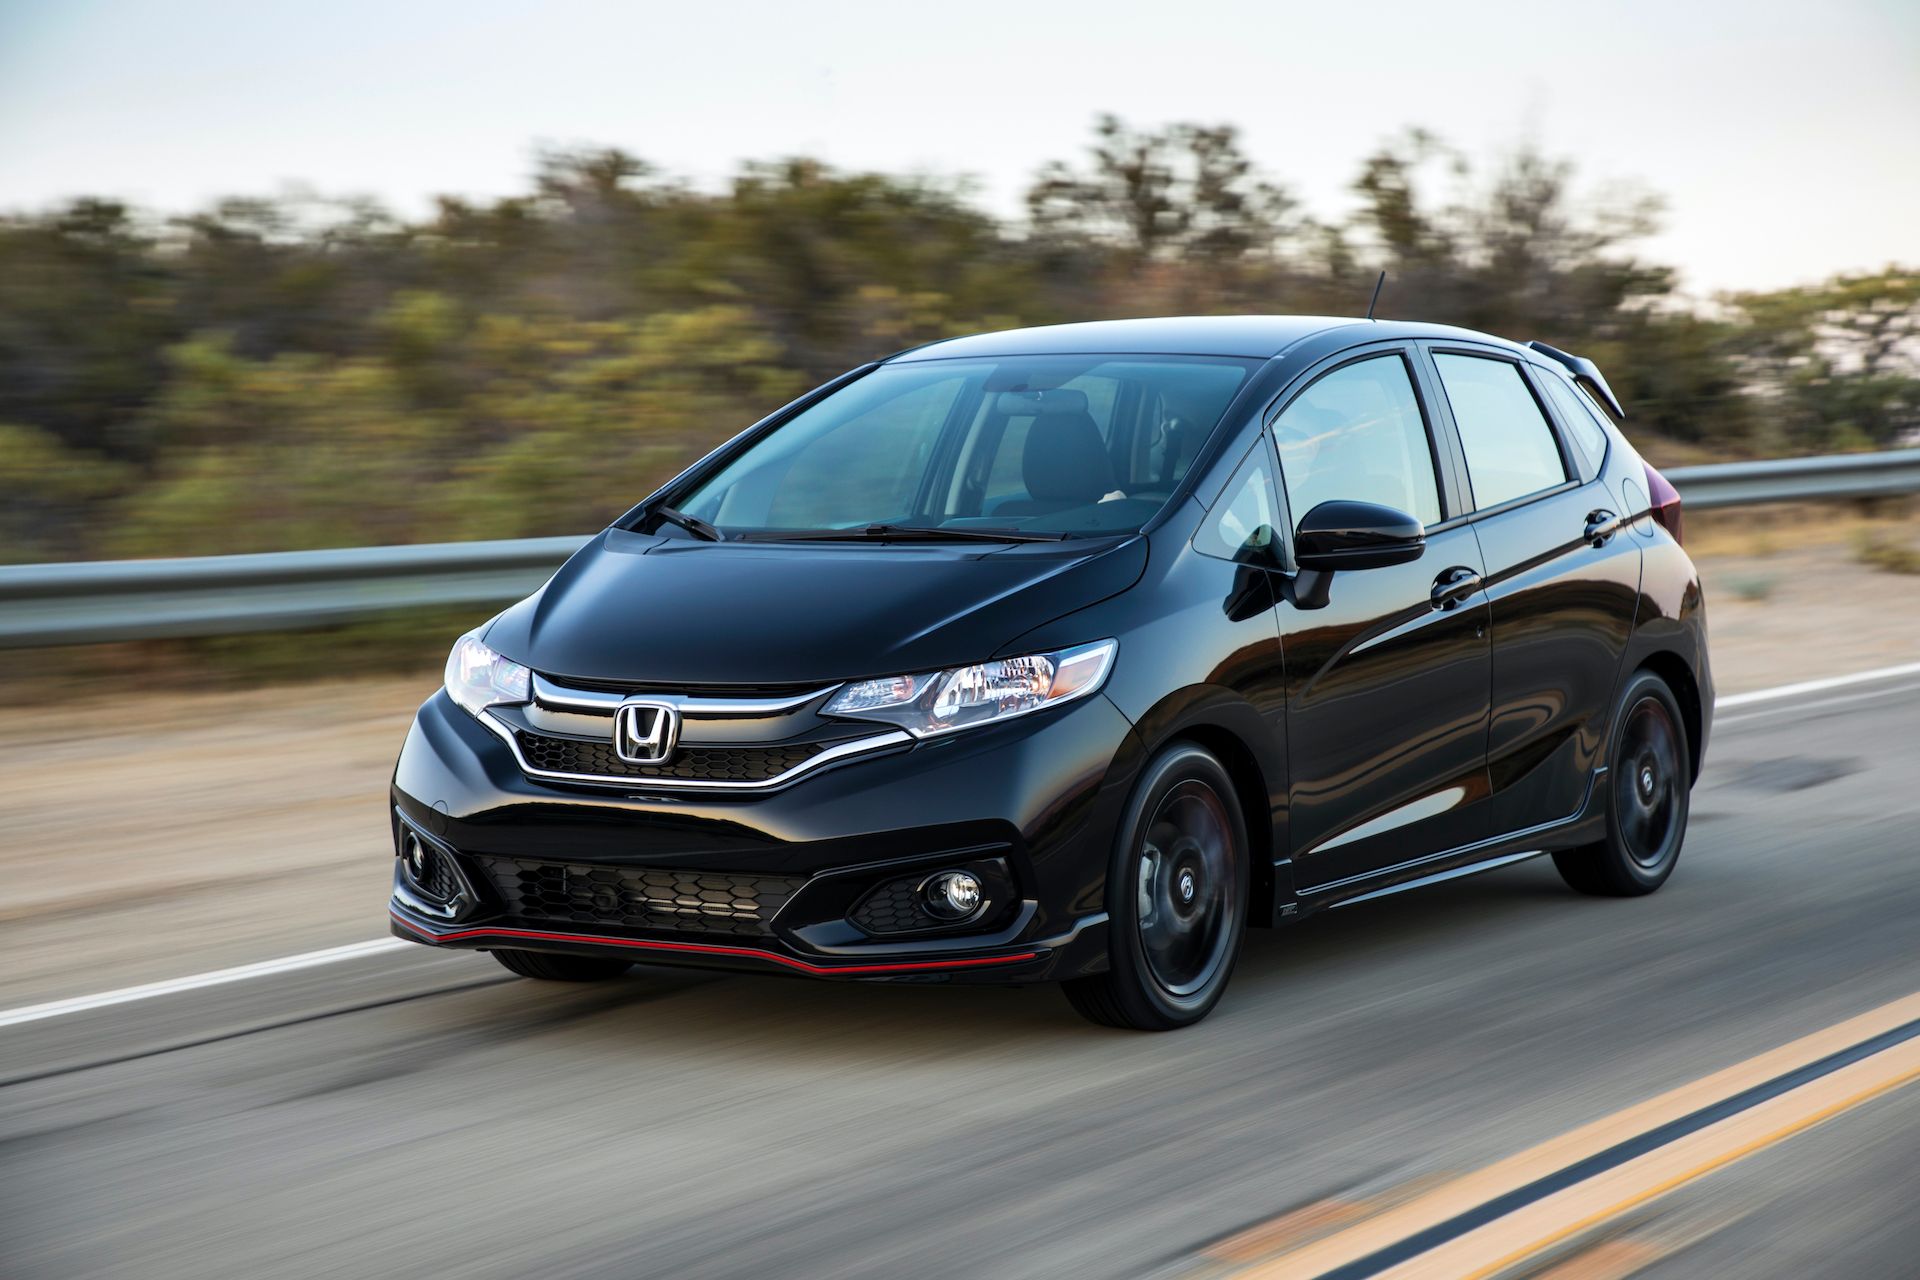 2019 Honda Fit on the highway